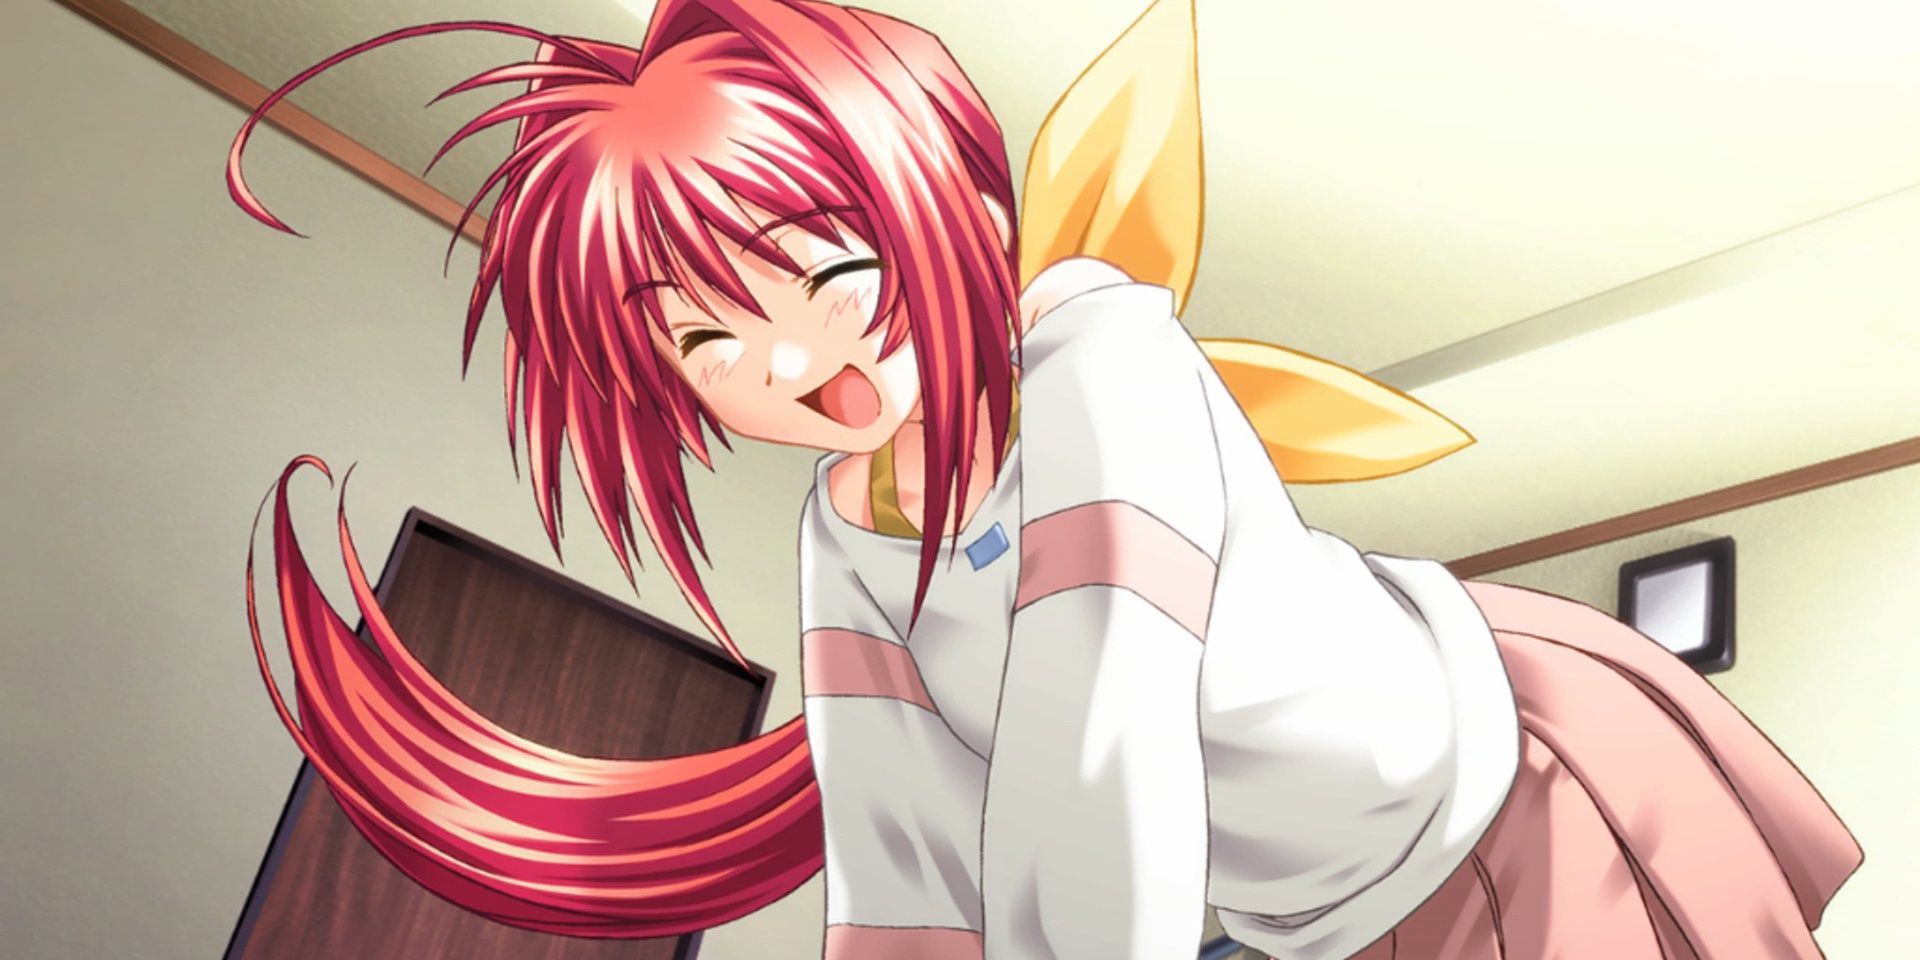 A character laughs in the Muv-Luv visual novel